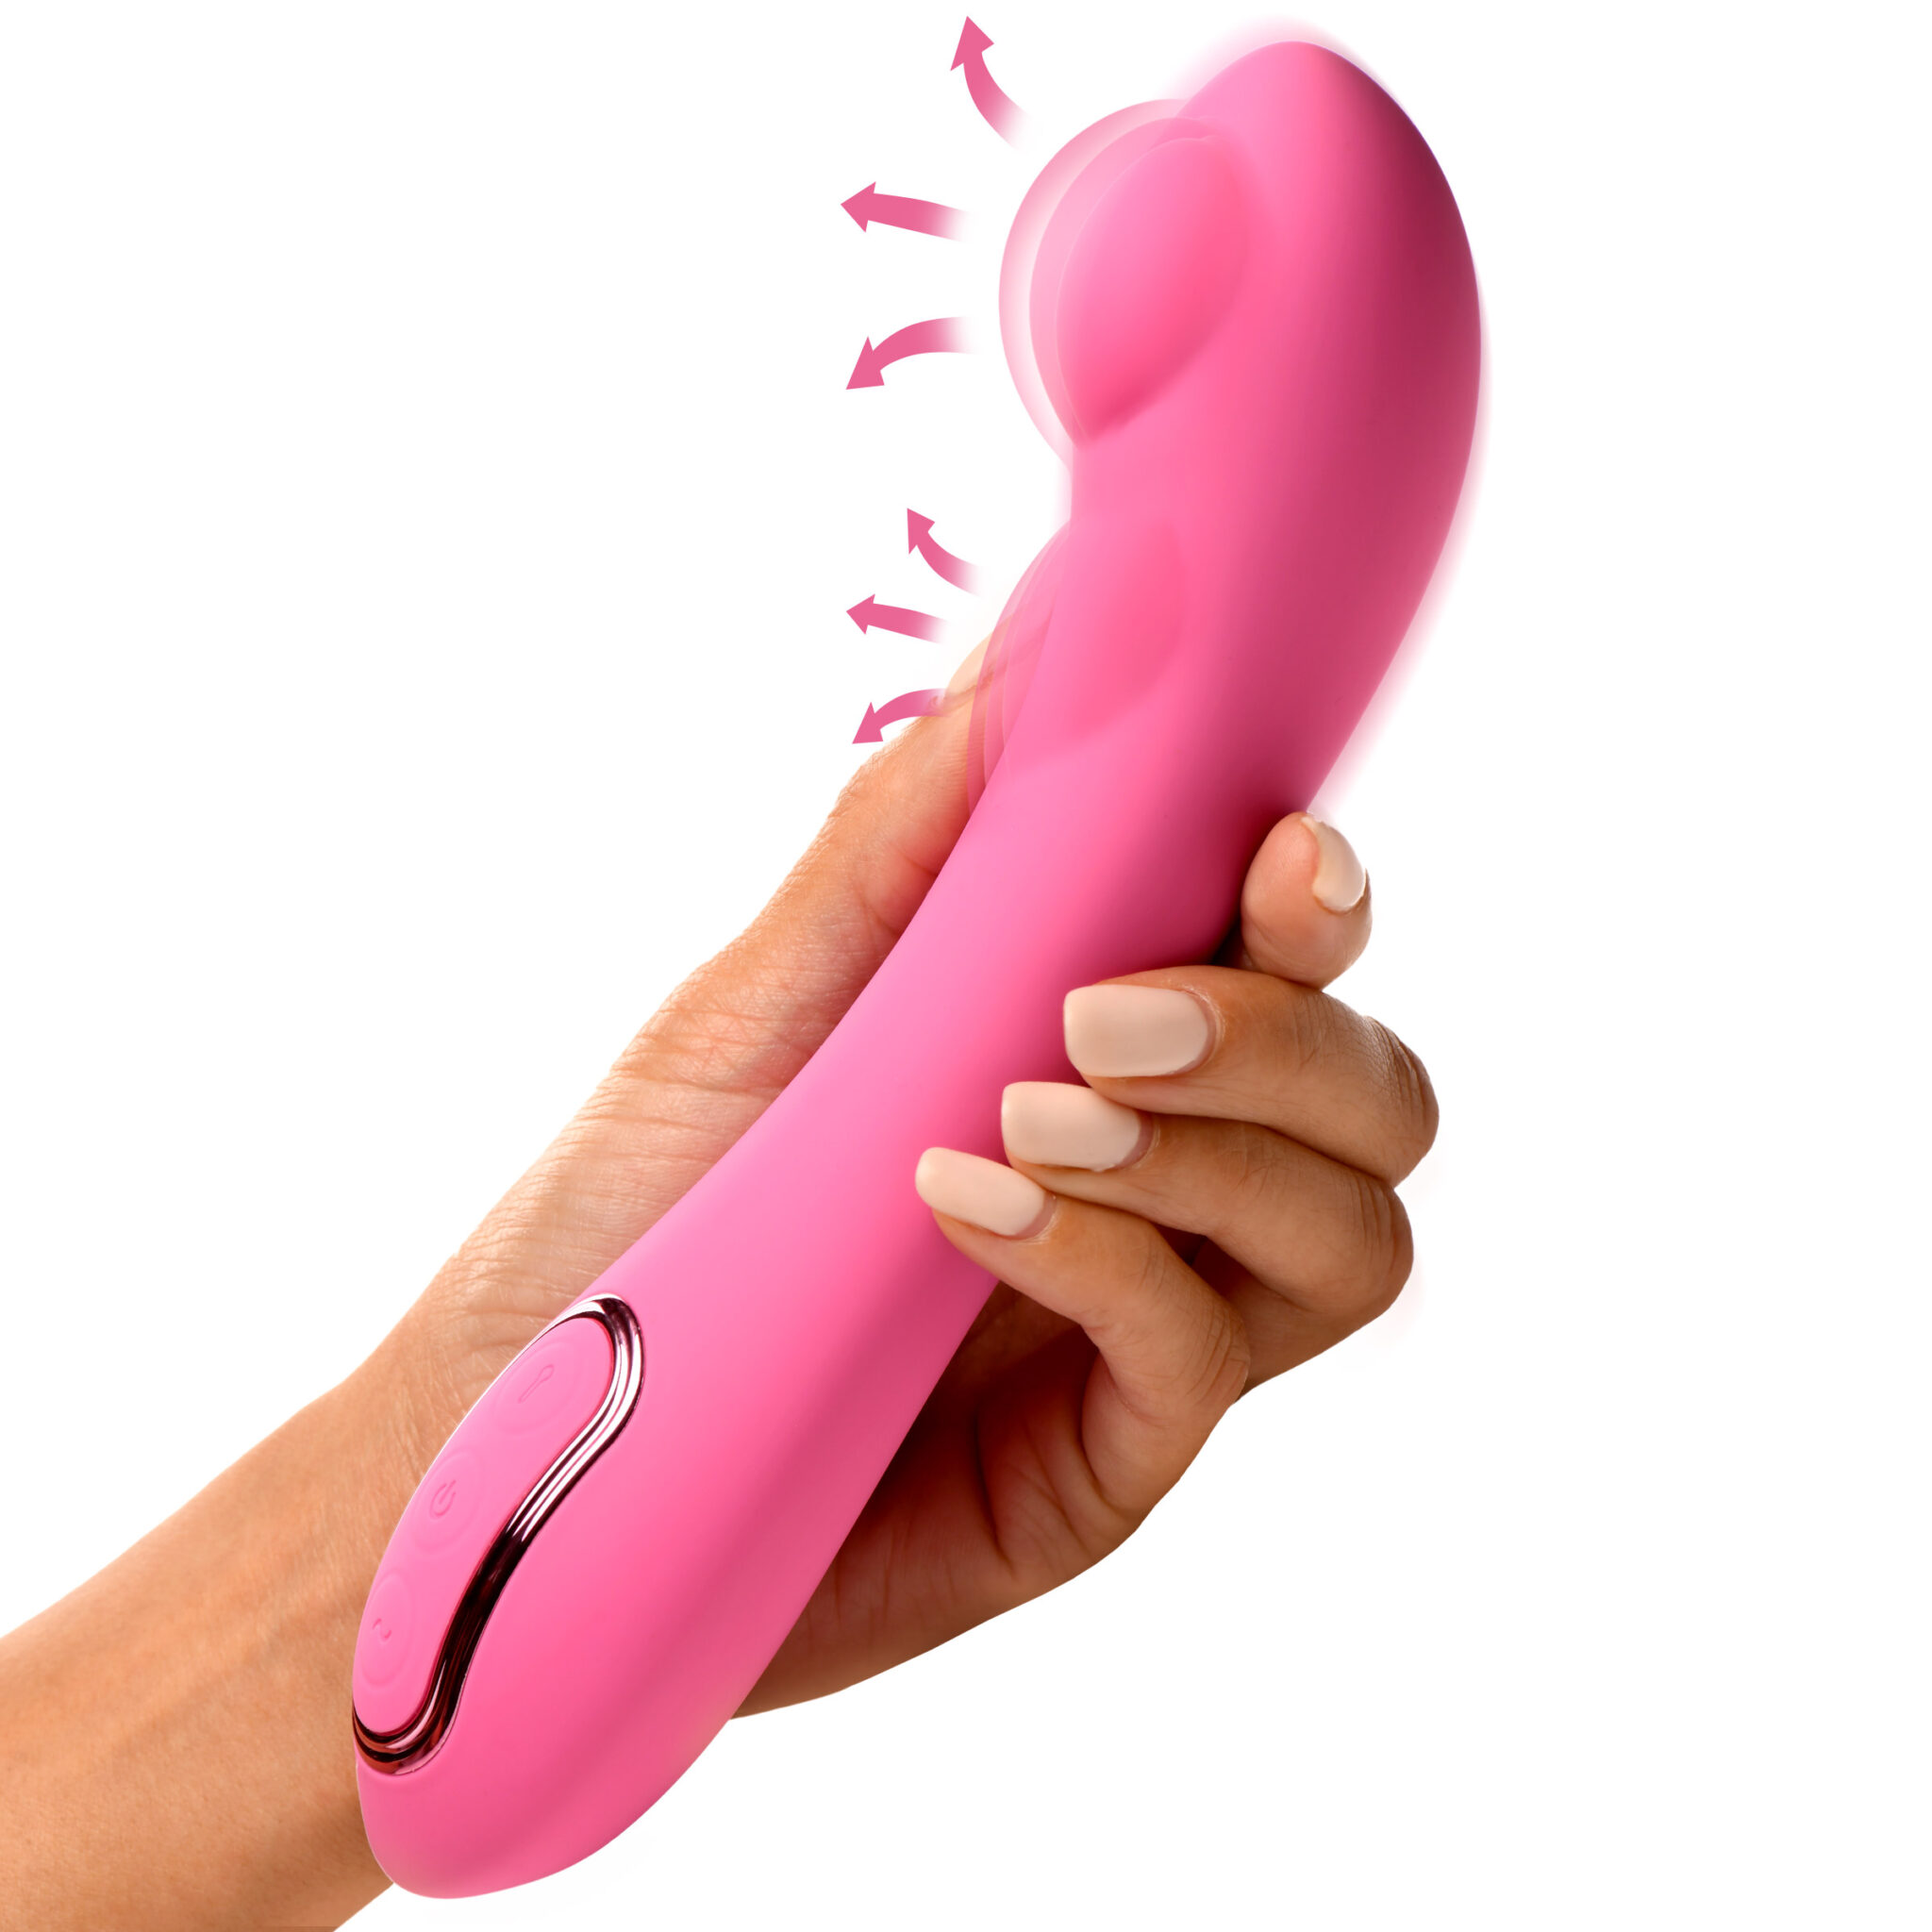 Extreme-G Inflating G-spot Silicone Vibrator-2